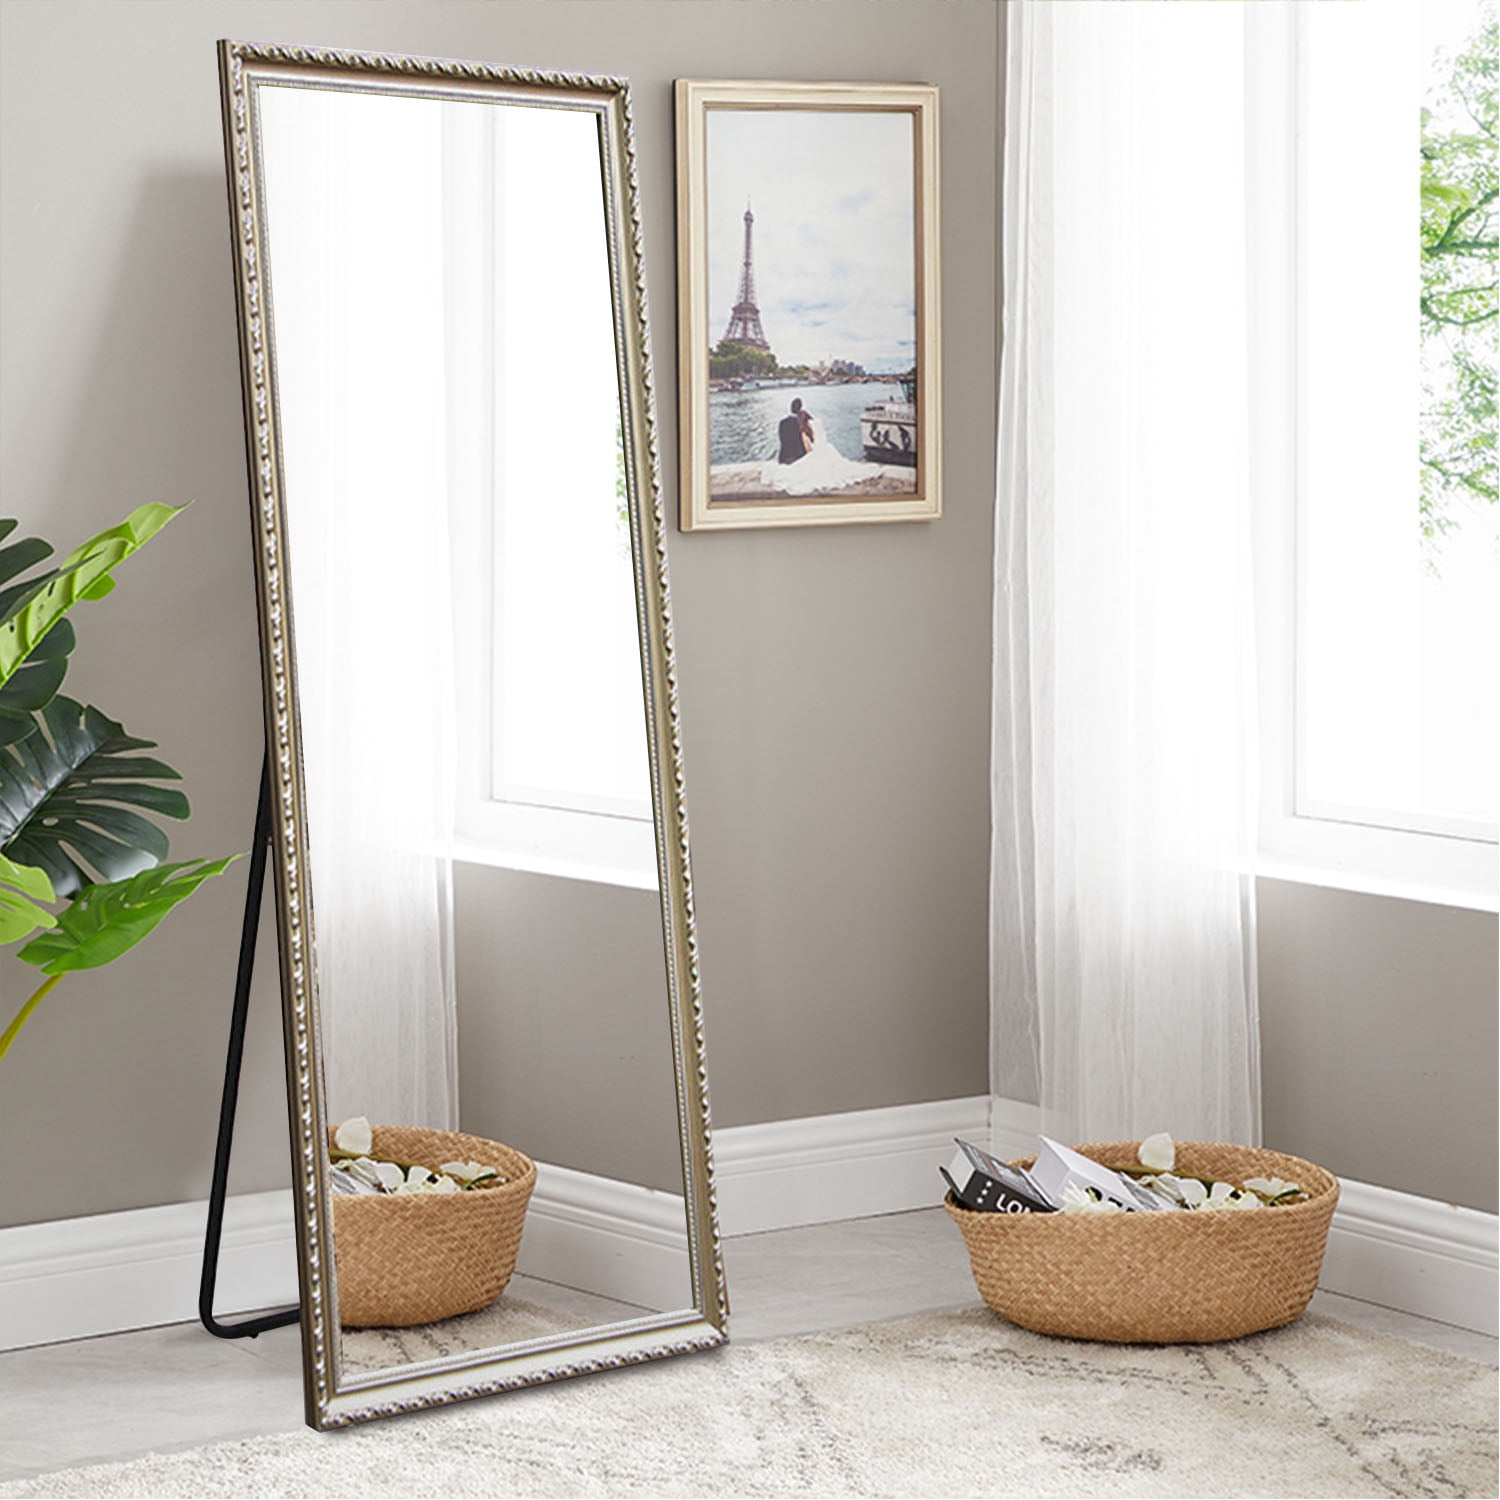 Full Length Mirror Floor Mirror with Standing Holder Large Wall Mounted